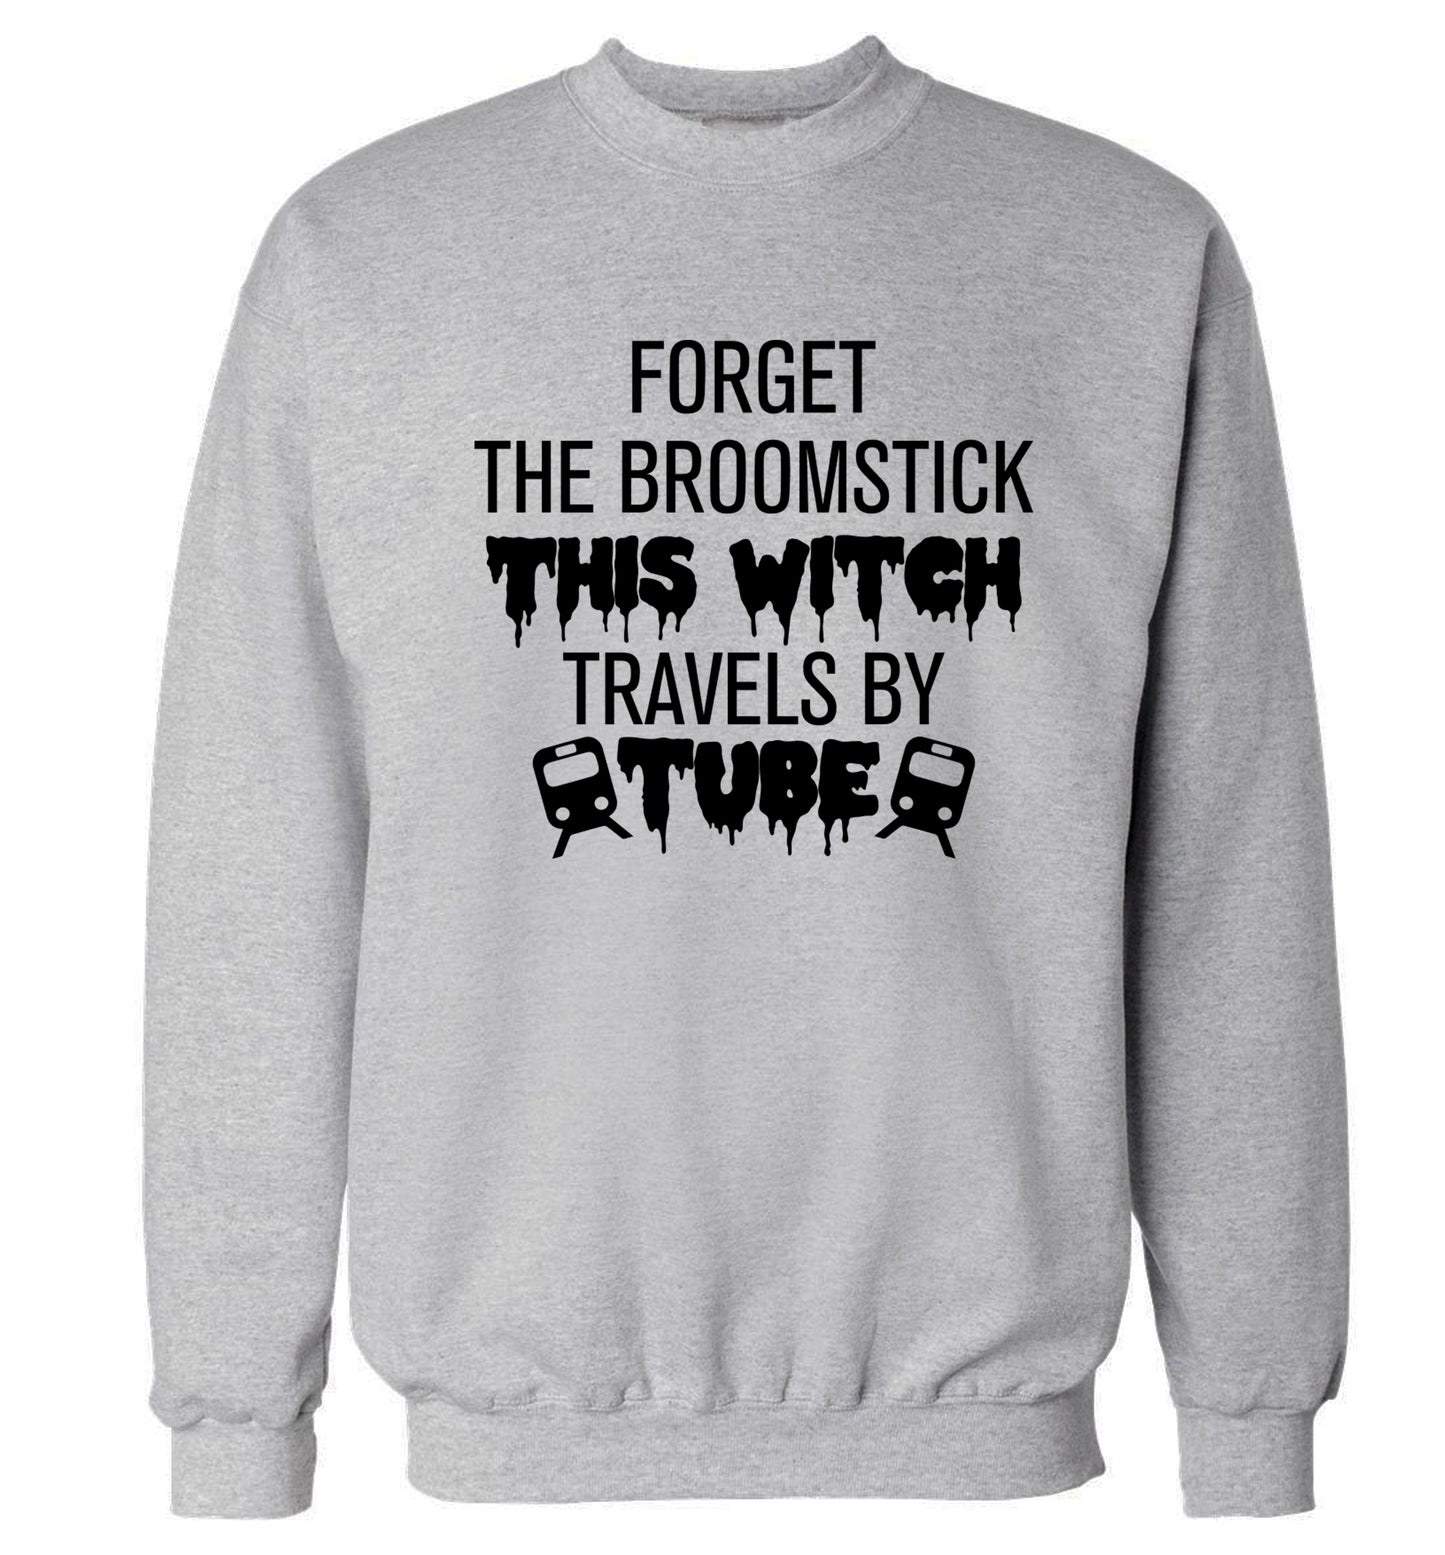 Forget the broomstick this witch travels by tube Adult's unisexgrey Sweater 2XL